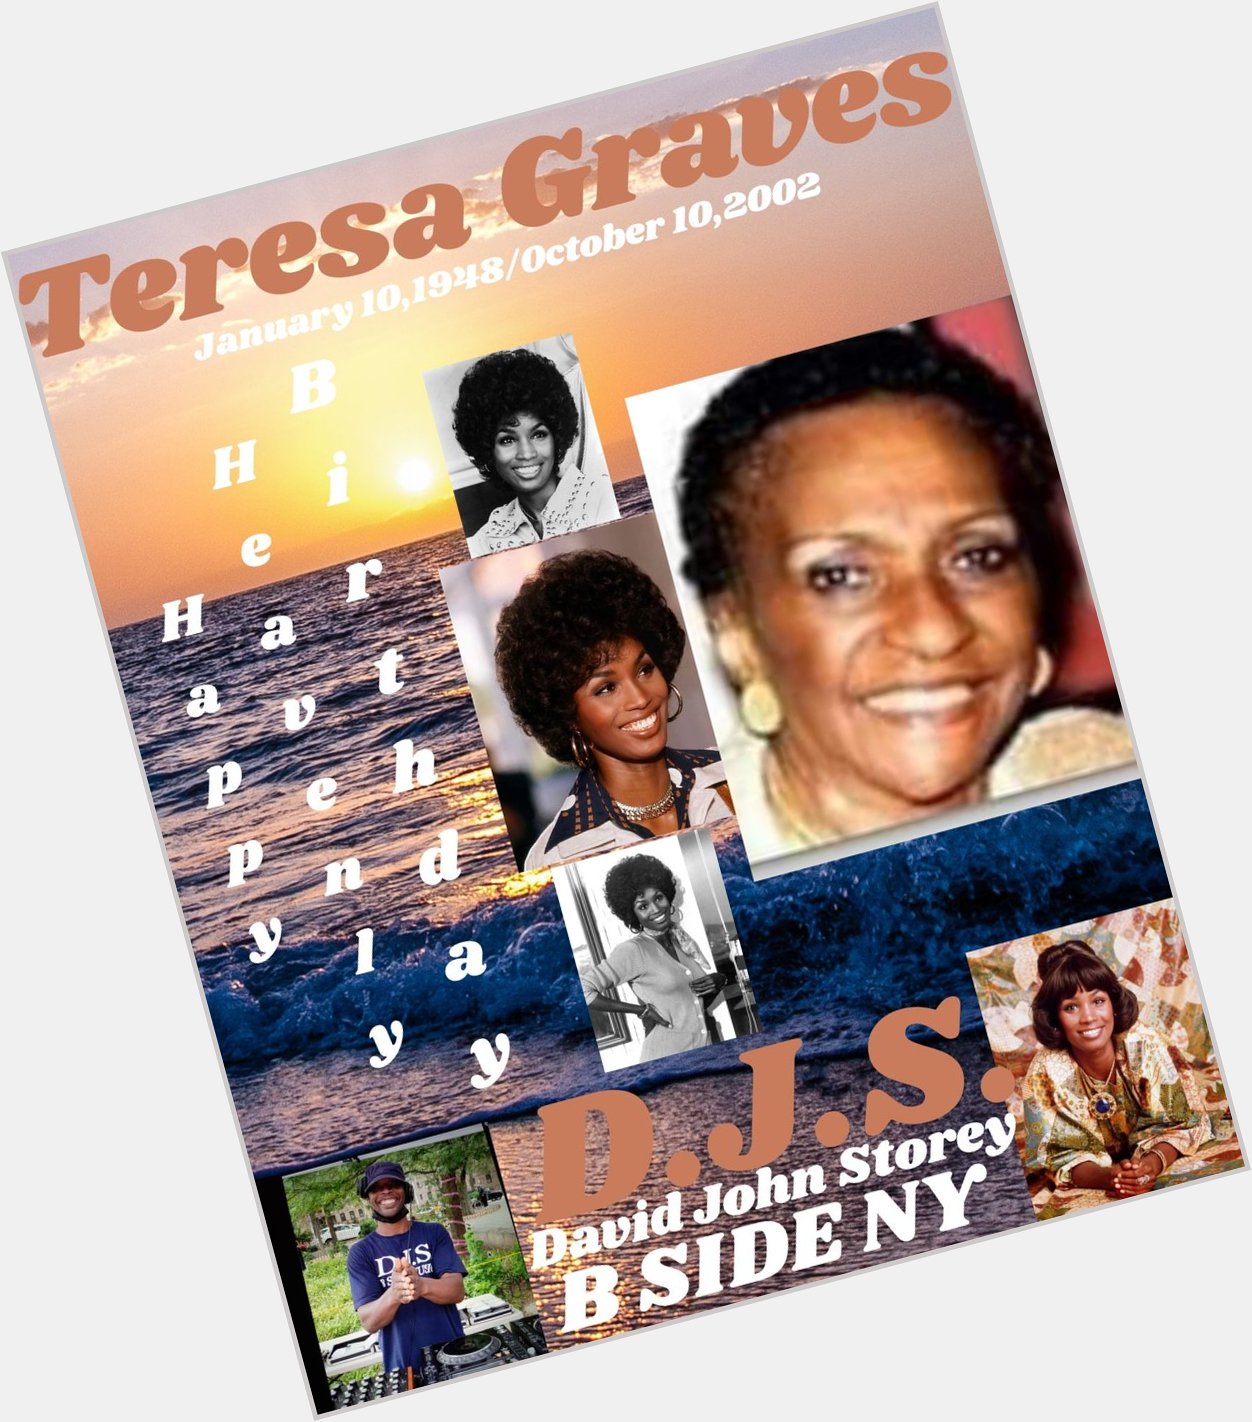 I(D.J.S.) taking time to say Happy Heavenly Birthday to Actress \"TERESA GRAVES\"(Christie Love)!!!!! 